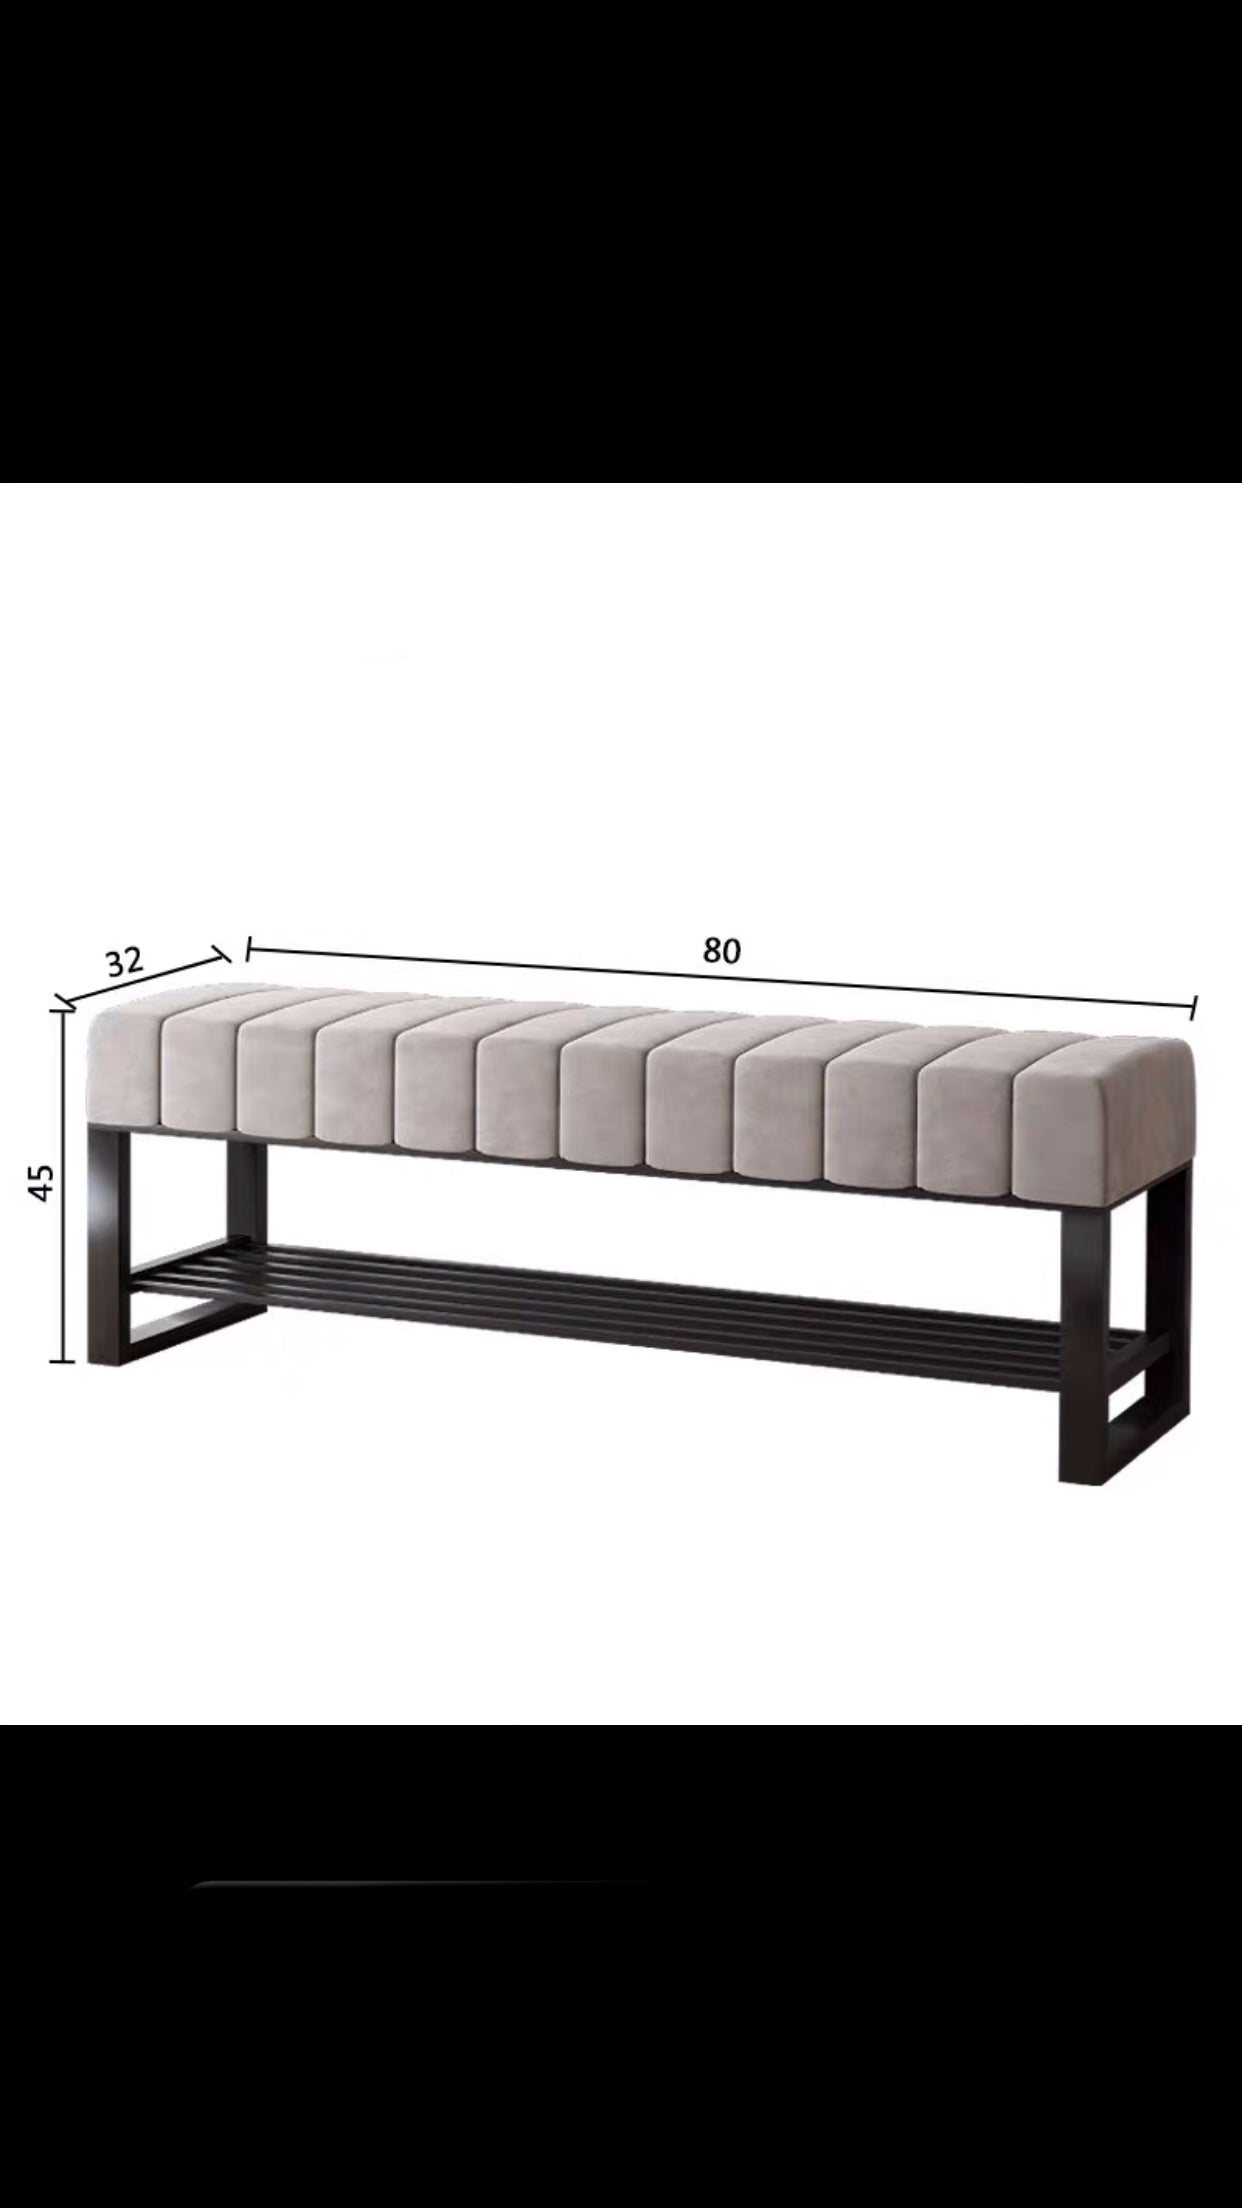 Loxe Upholstered Bench - 4 Seasons Home Gadgets